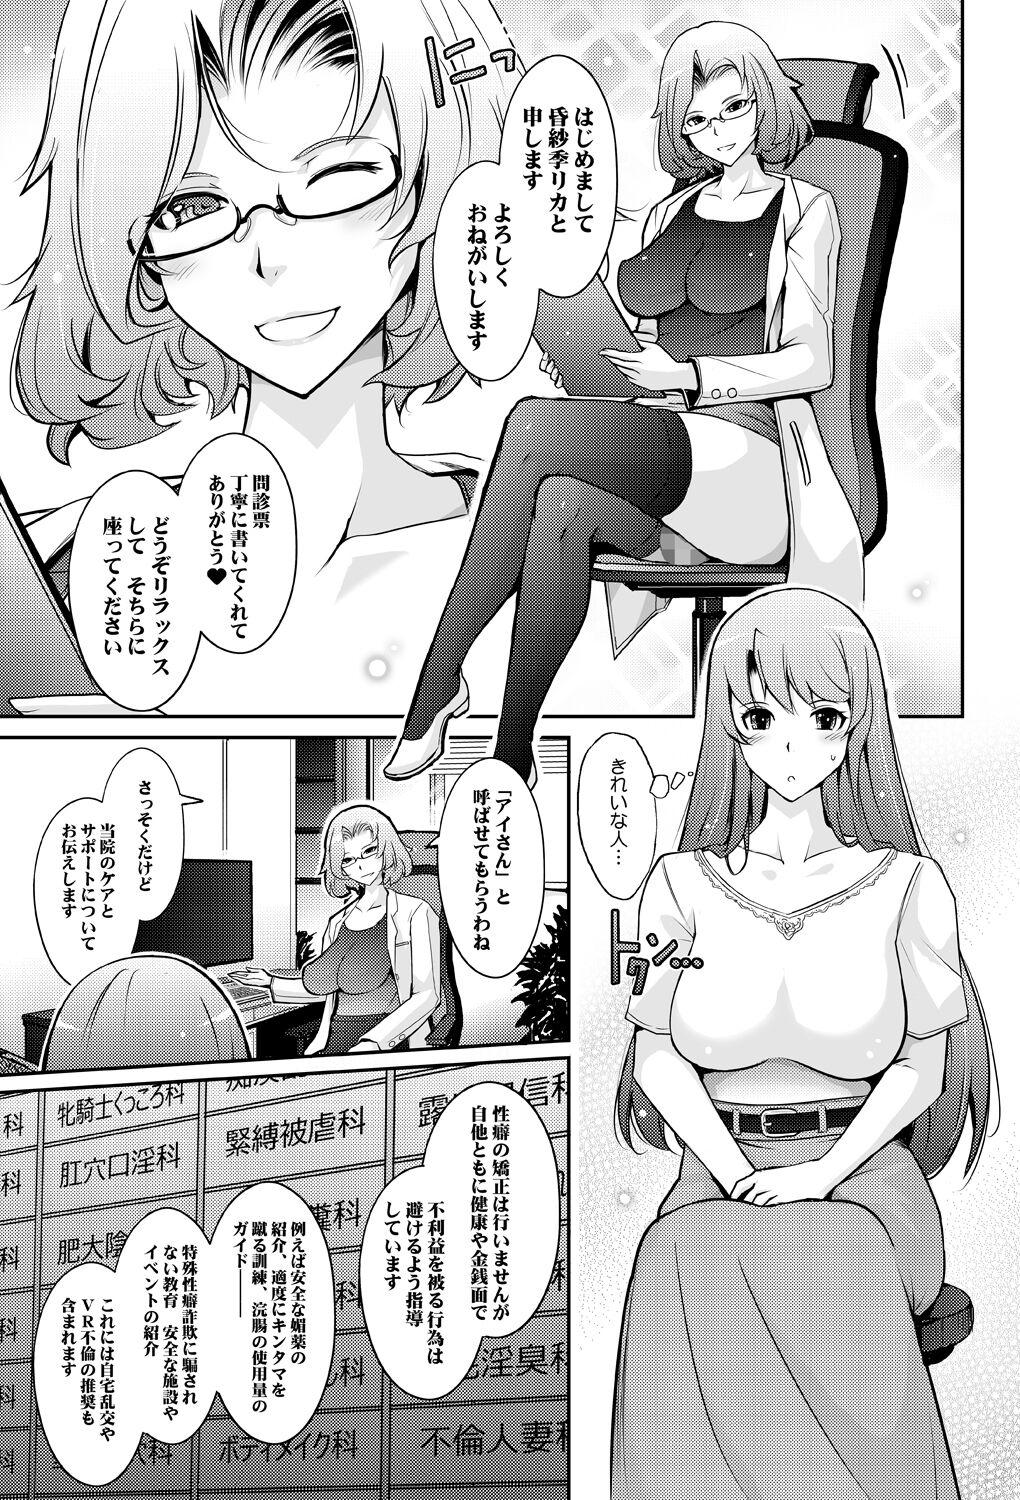 Spying 淫猥性癖全肯定クリニック 肛穴口淫科 - Original Transexual - Page 7